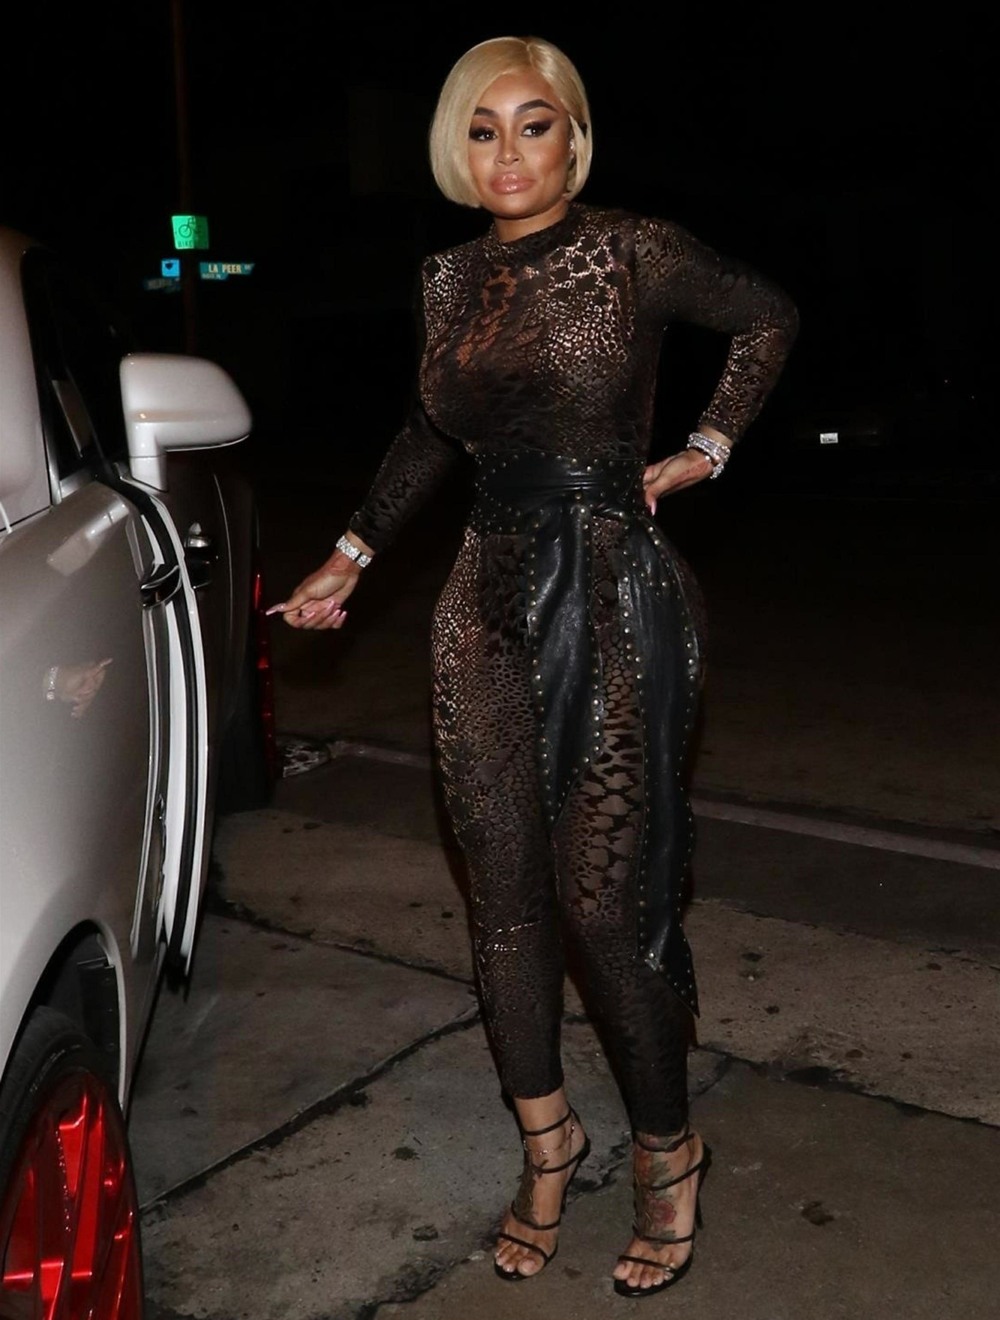 Blac Chyna shows off her curves greeting fans outside Craig's restaurant